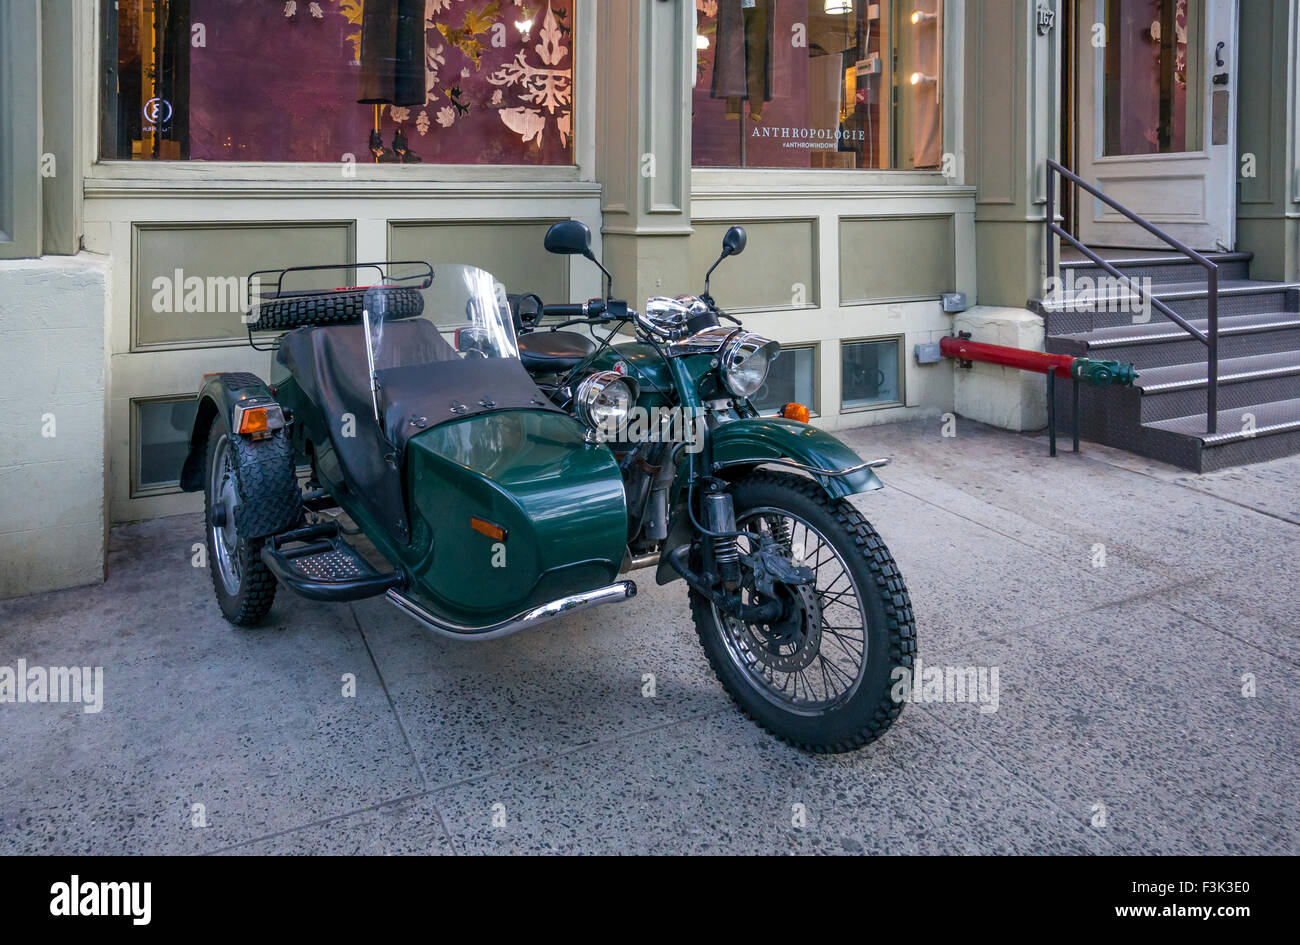 Ural motorcycle with sidecar Stock Photo